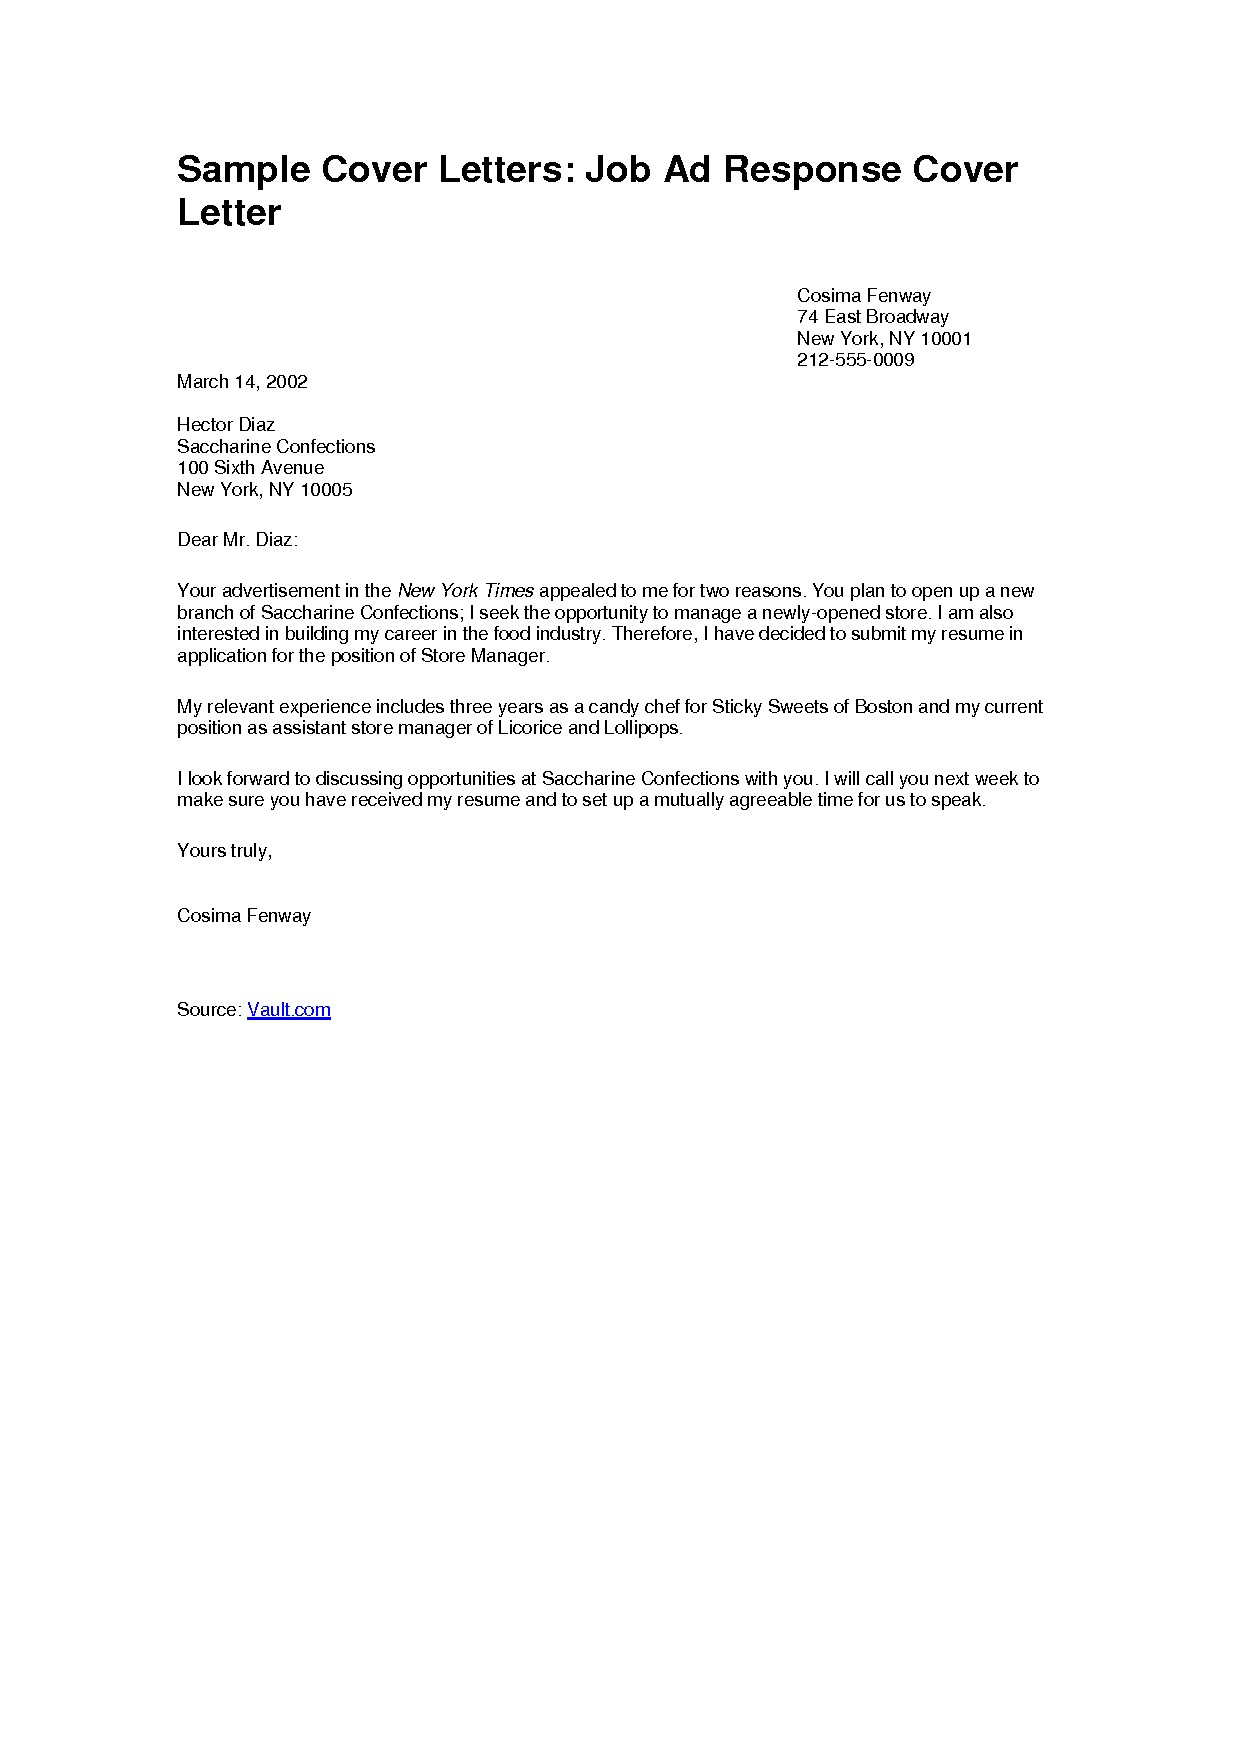 Good Cover Letter Template - Samples Of Job Cover Letters Acurnamedia